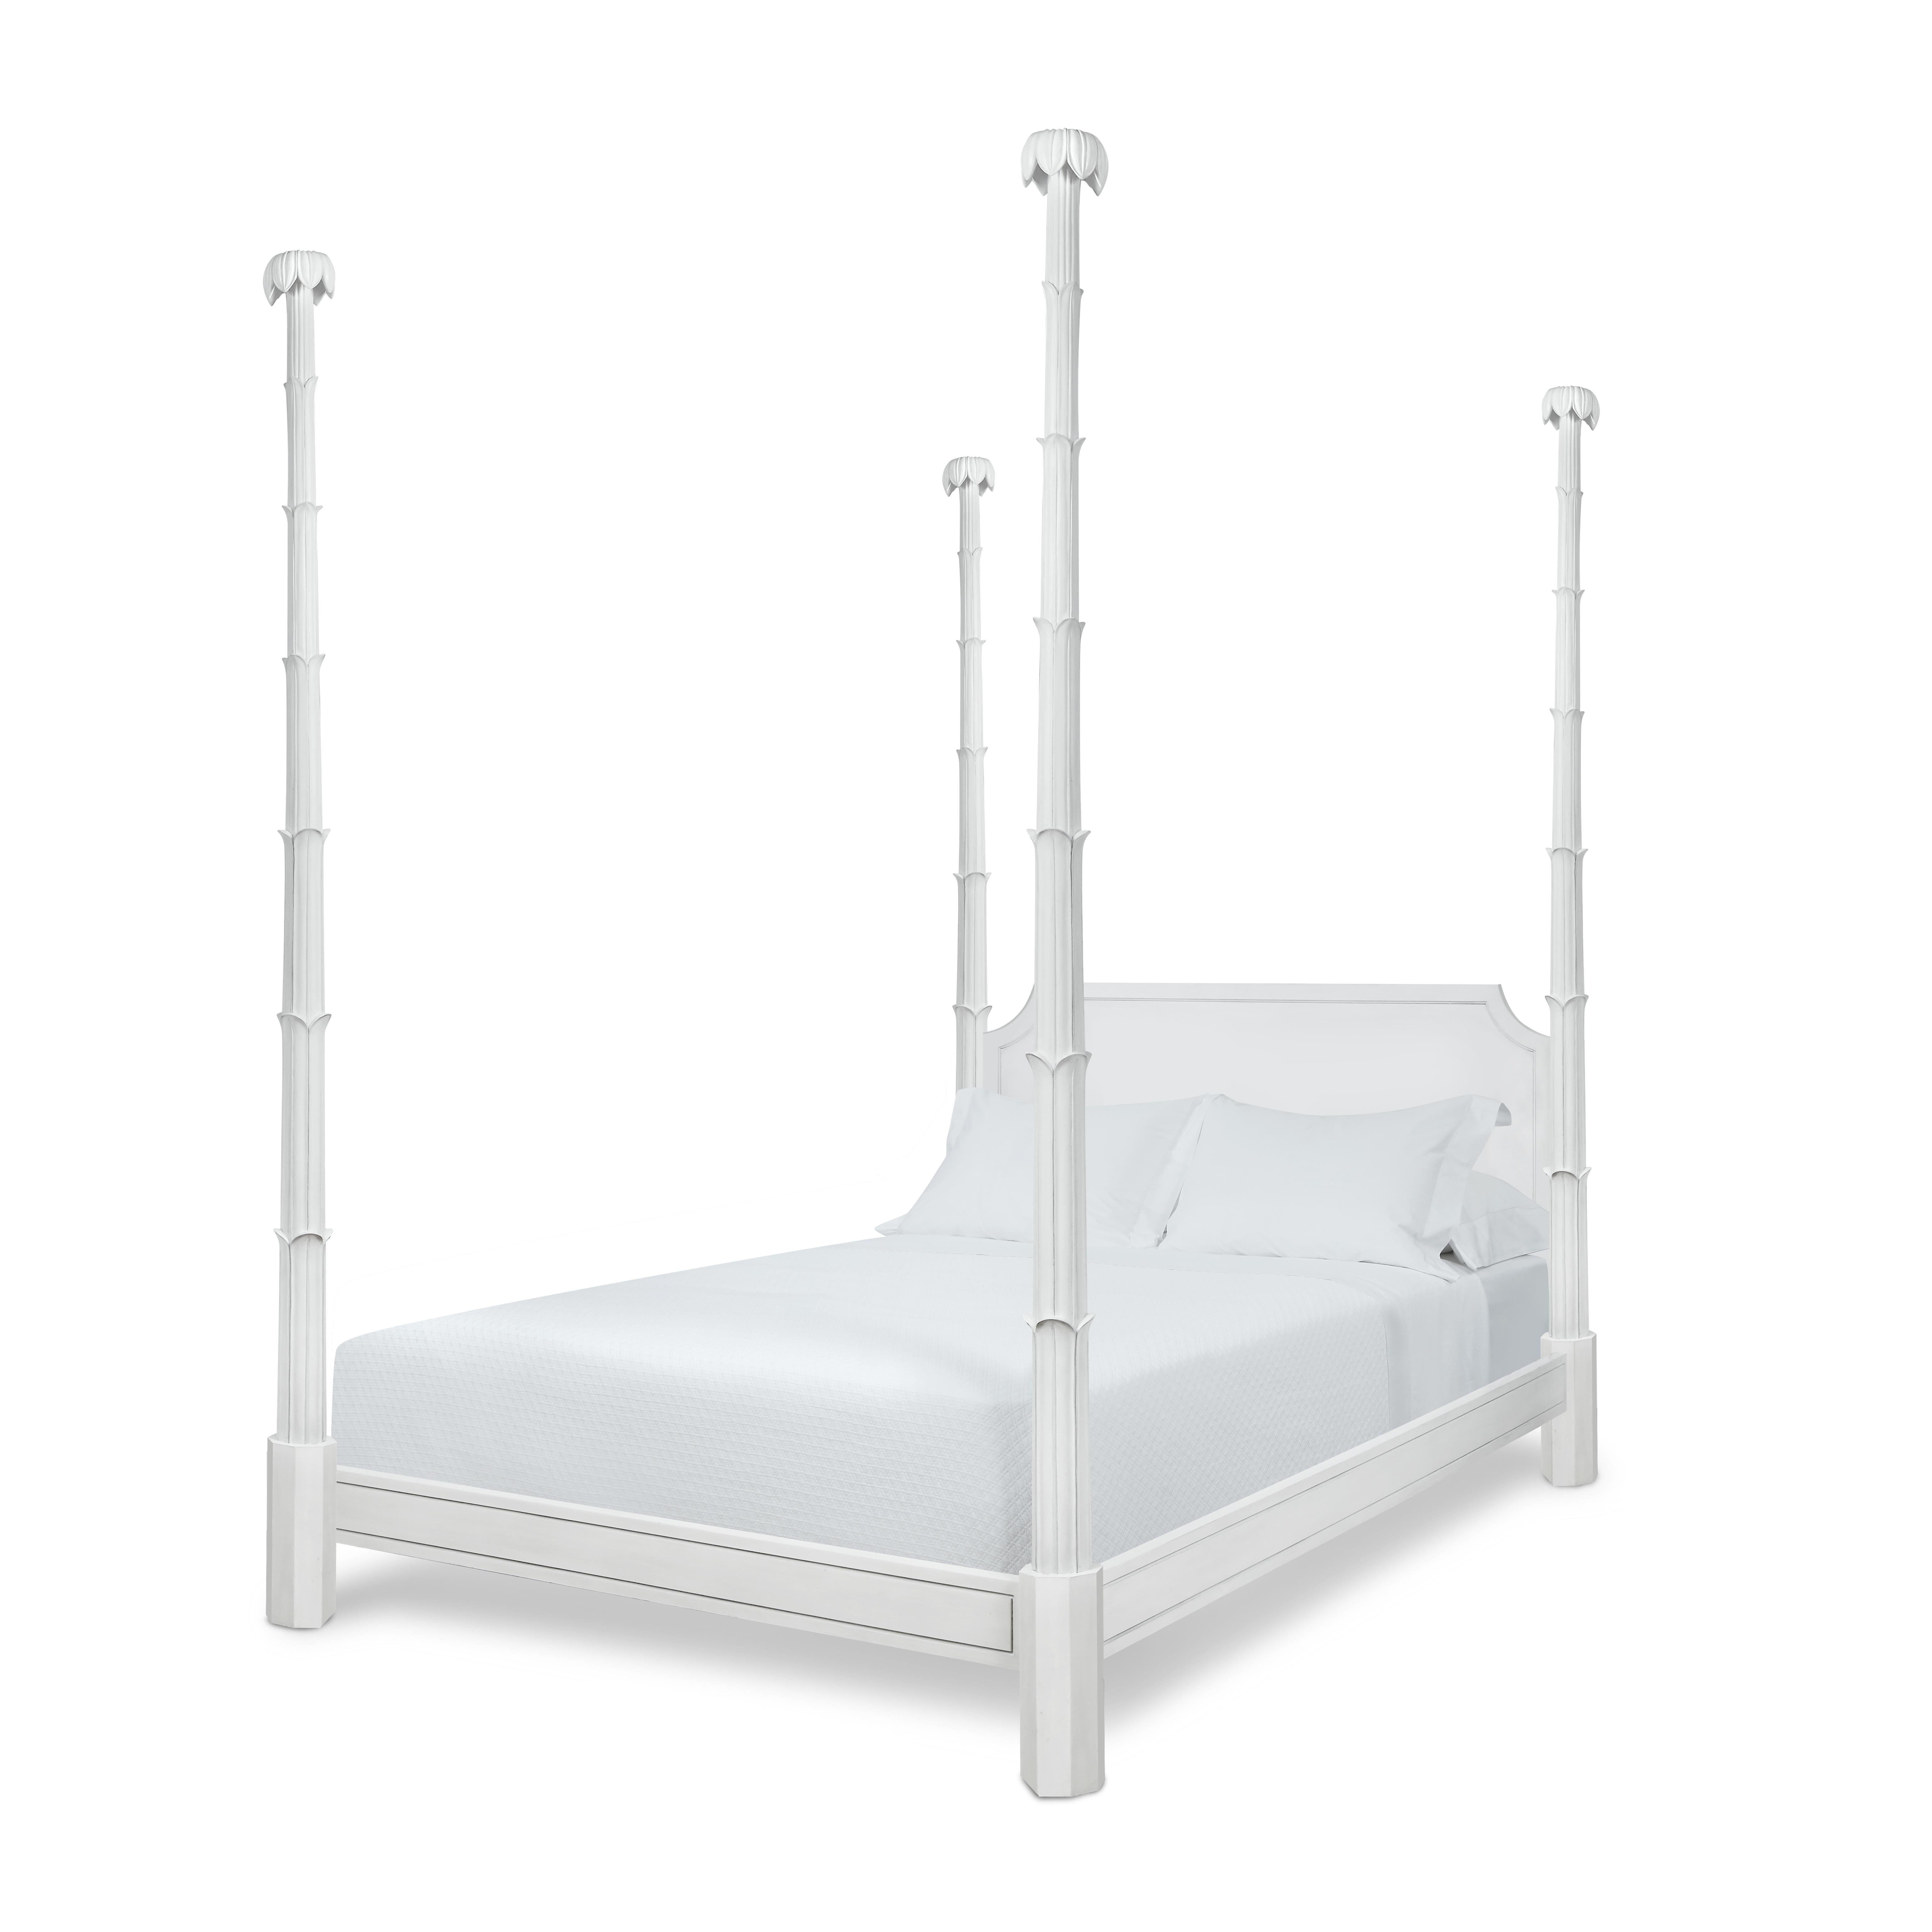 The Keller bed celebrates the bold carving of the Hollywood Regency style, and features carved, septet foliated posts crowned with petals. Its sophisticated, notched headboard is set off by the serene white painted finish, which also covers the